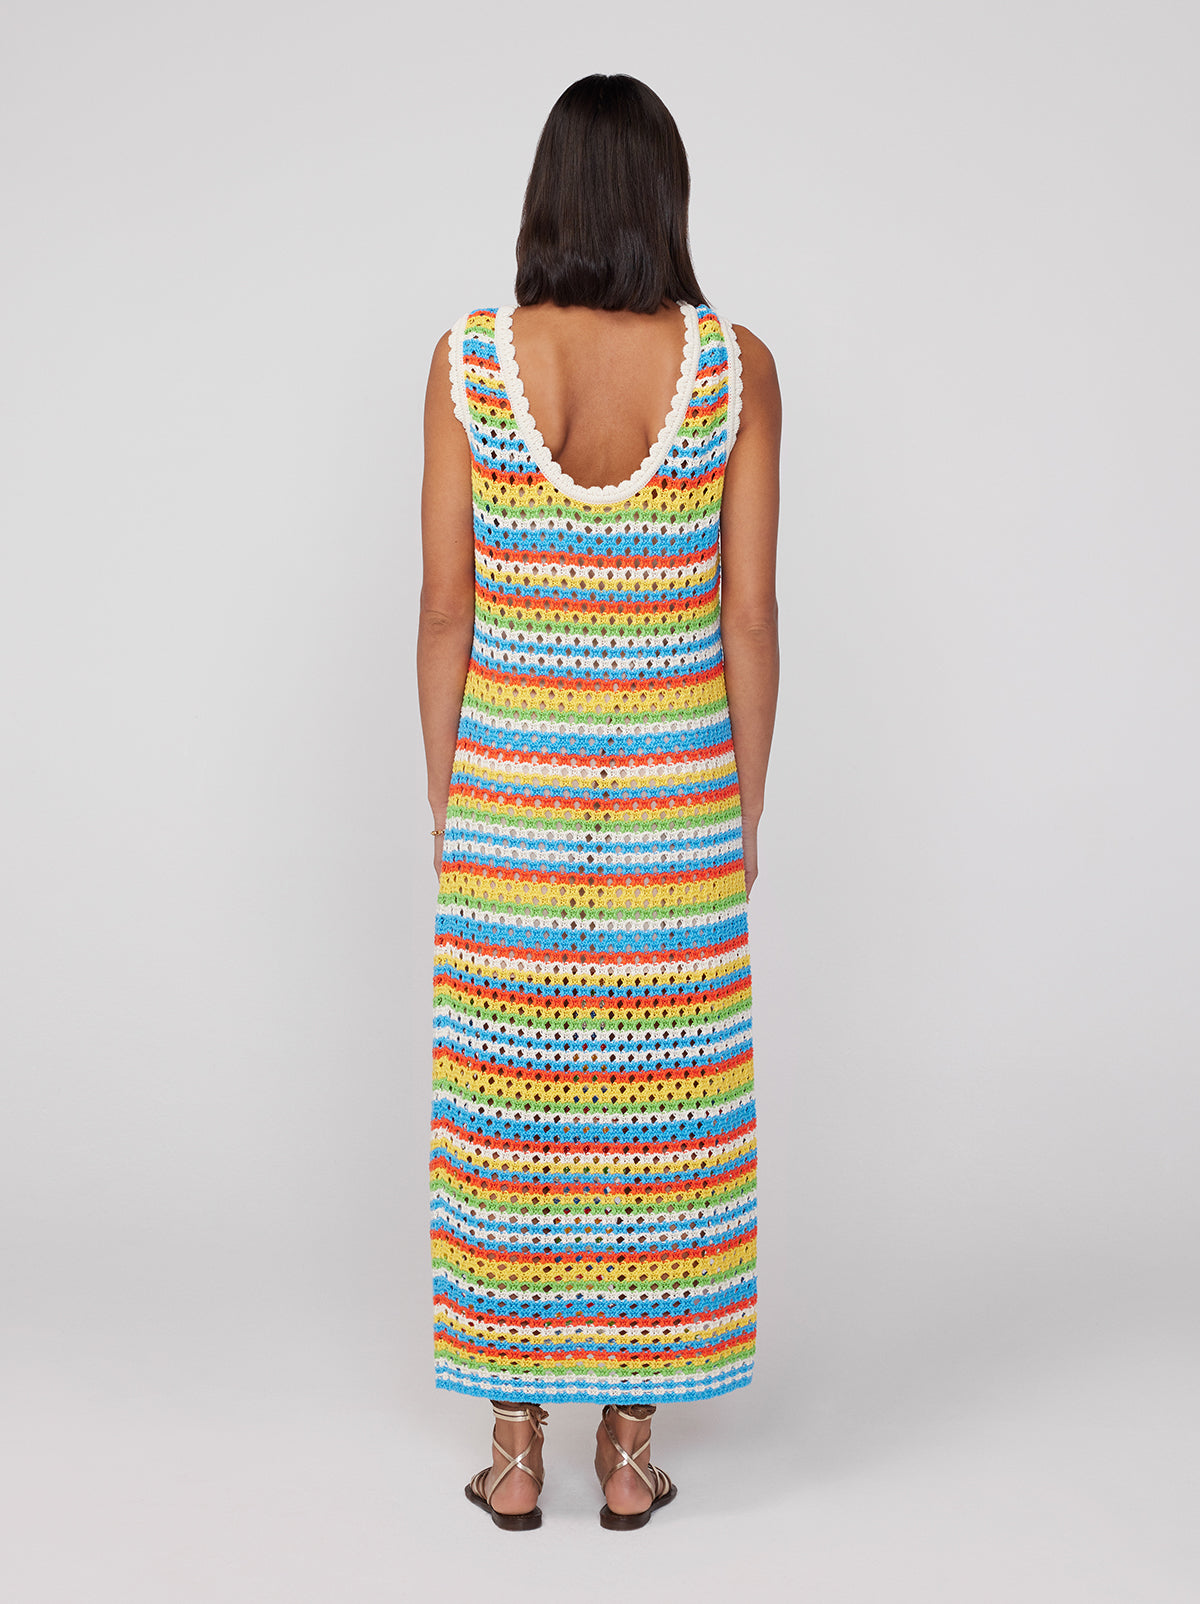 alt="Bunty Blue Stripe Crochet Knit Dress By KITRI Studio with a flattering fit around the chest and straight fit in the skirt. An ideal beach midi dress to throw over a swimsuit it features a summary rainbow pattern with colourful horizontal lines in 100% cotton crochet knitted design"